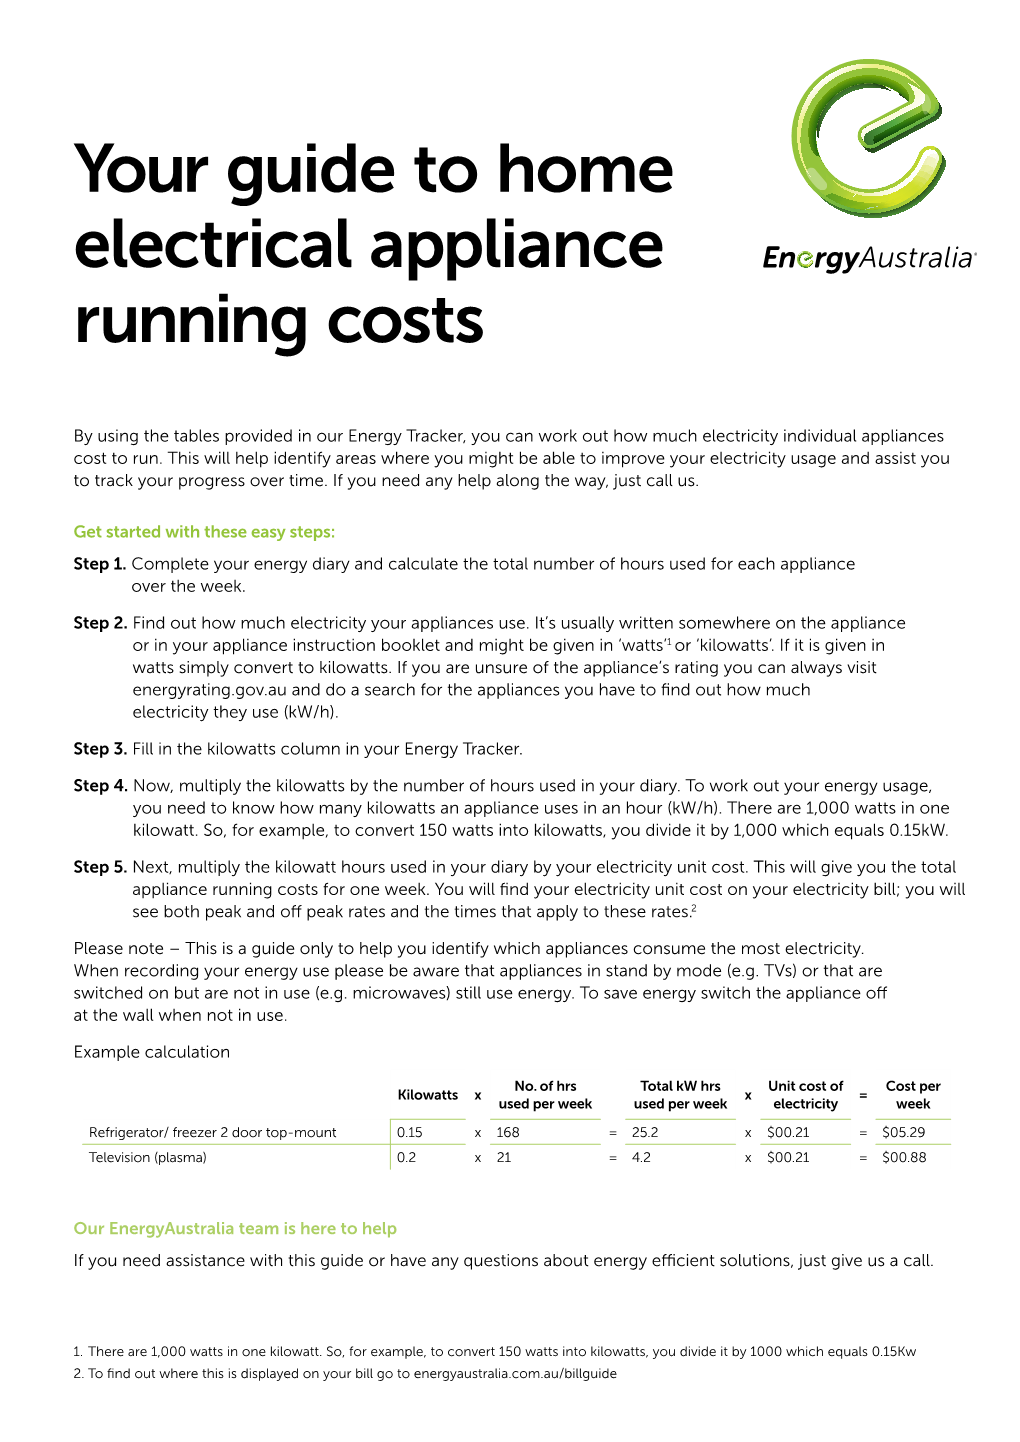 Your Guide to Home Electrical Appliance Running Costs